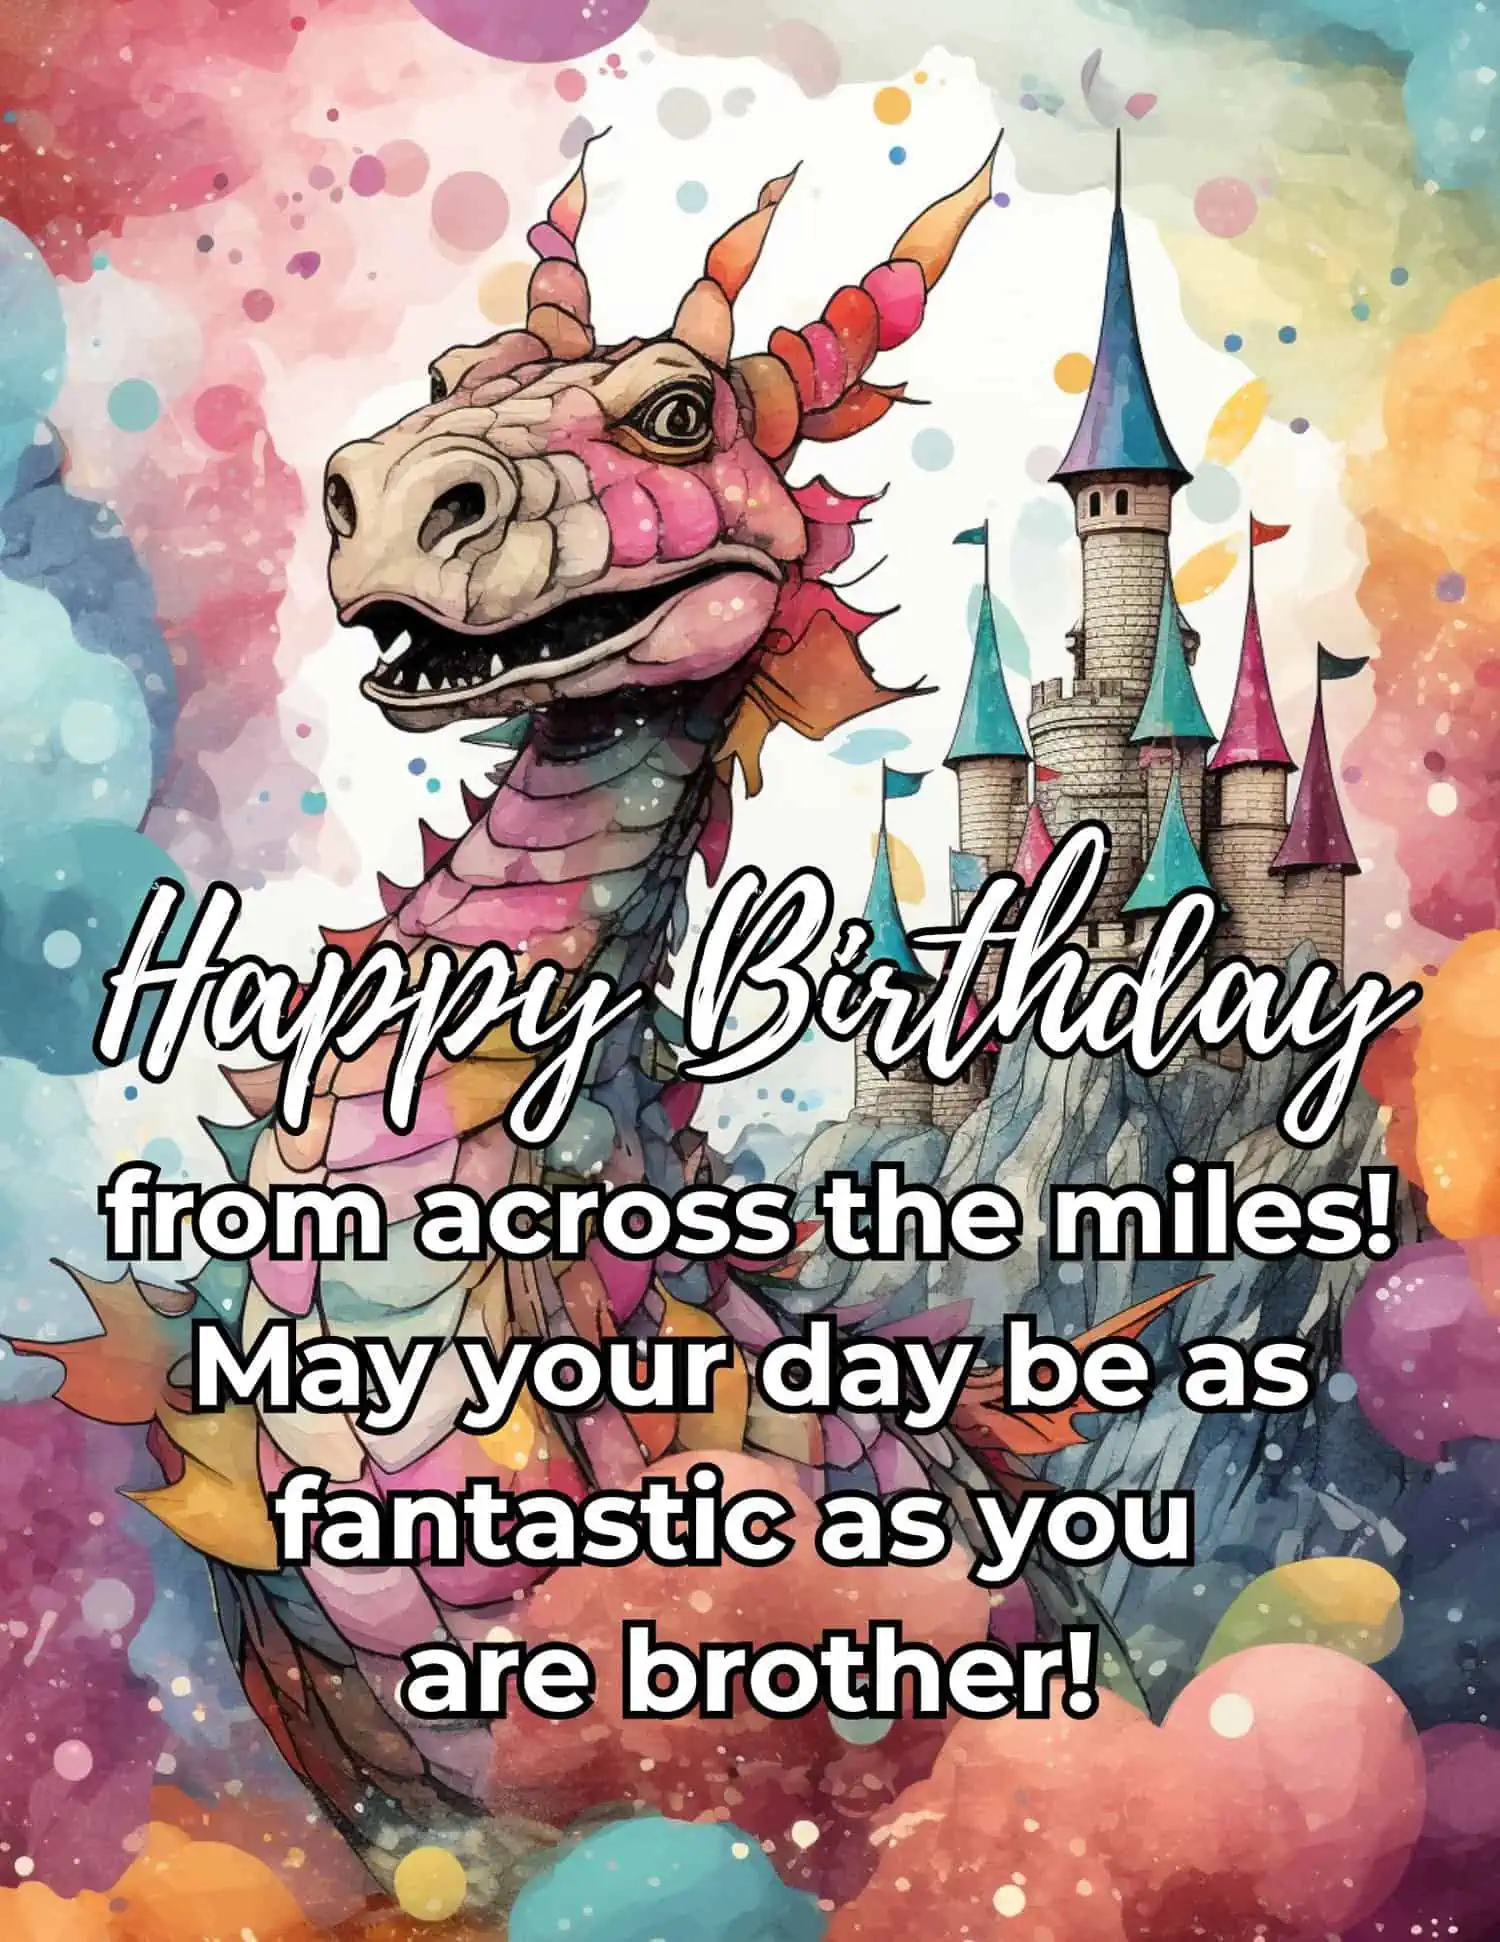 Thoughtful and warm birthday messages tailored for a brother-in-law who is far away, perfect for expressing love and best wishes across the distance.